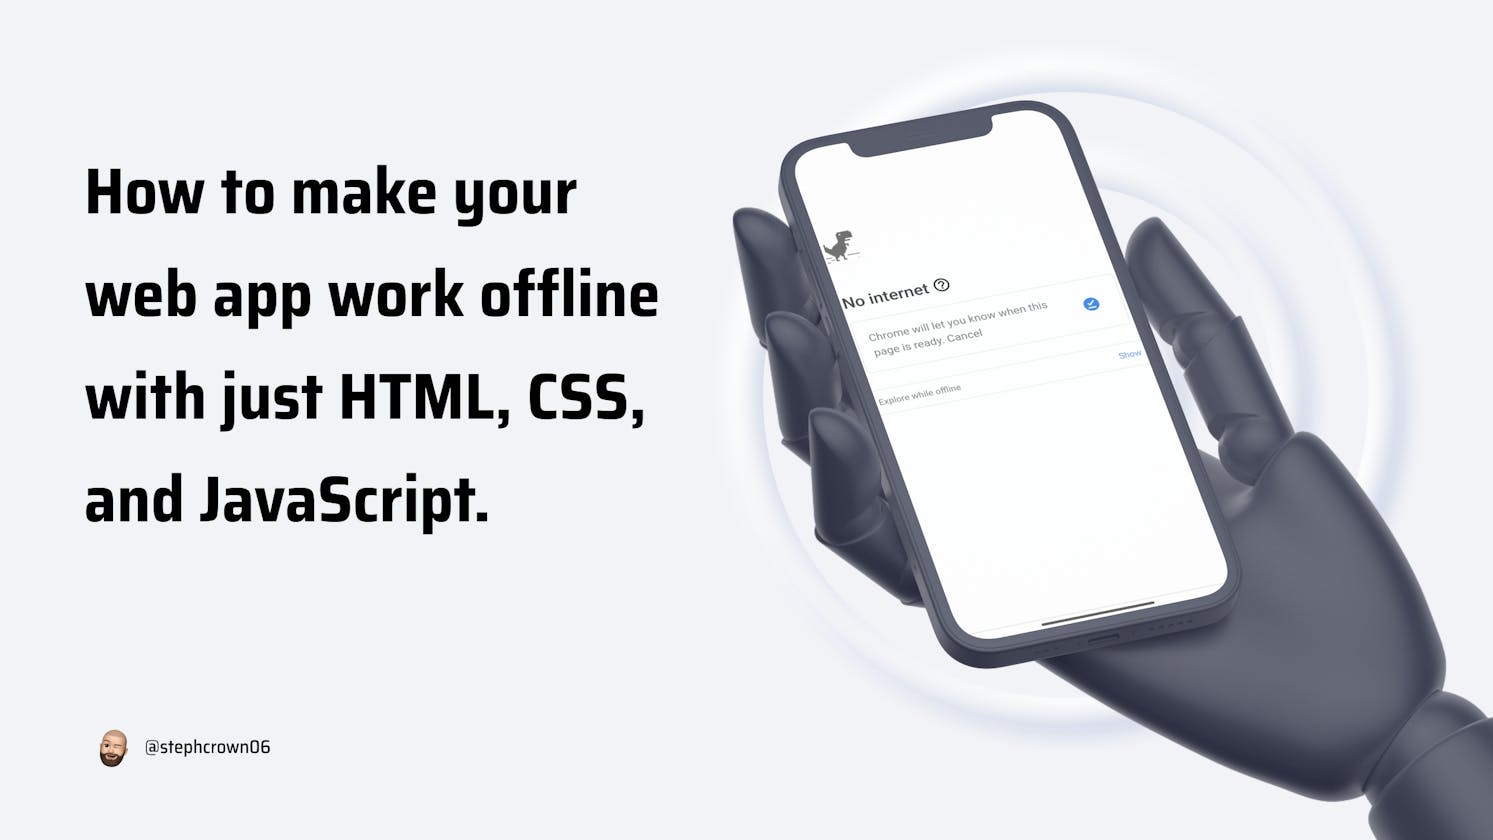 How to make your web app work offline with just HTML, CSS, and JavaScript.